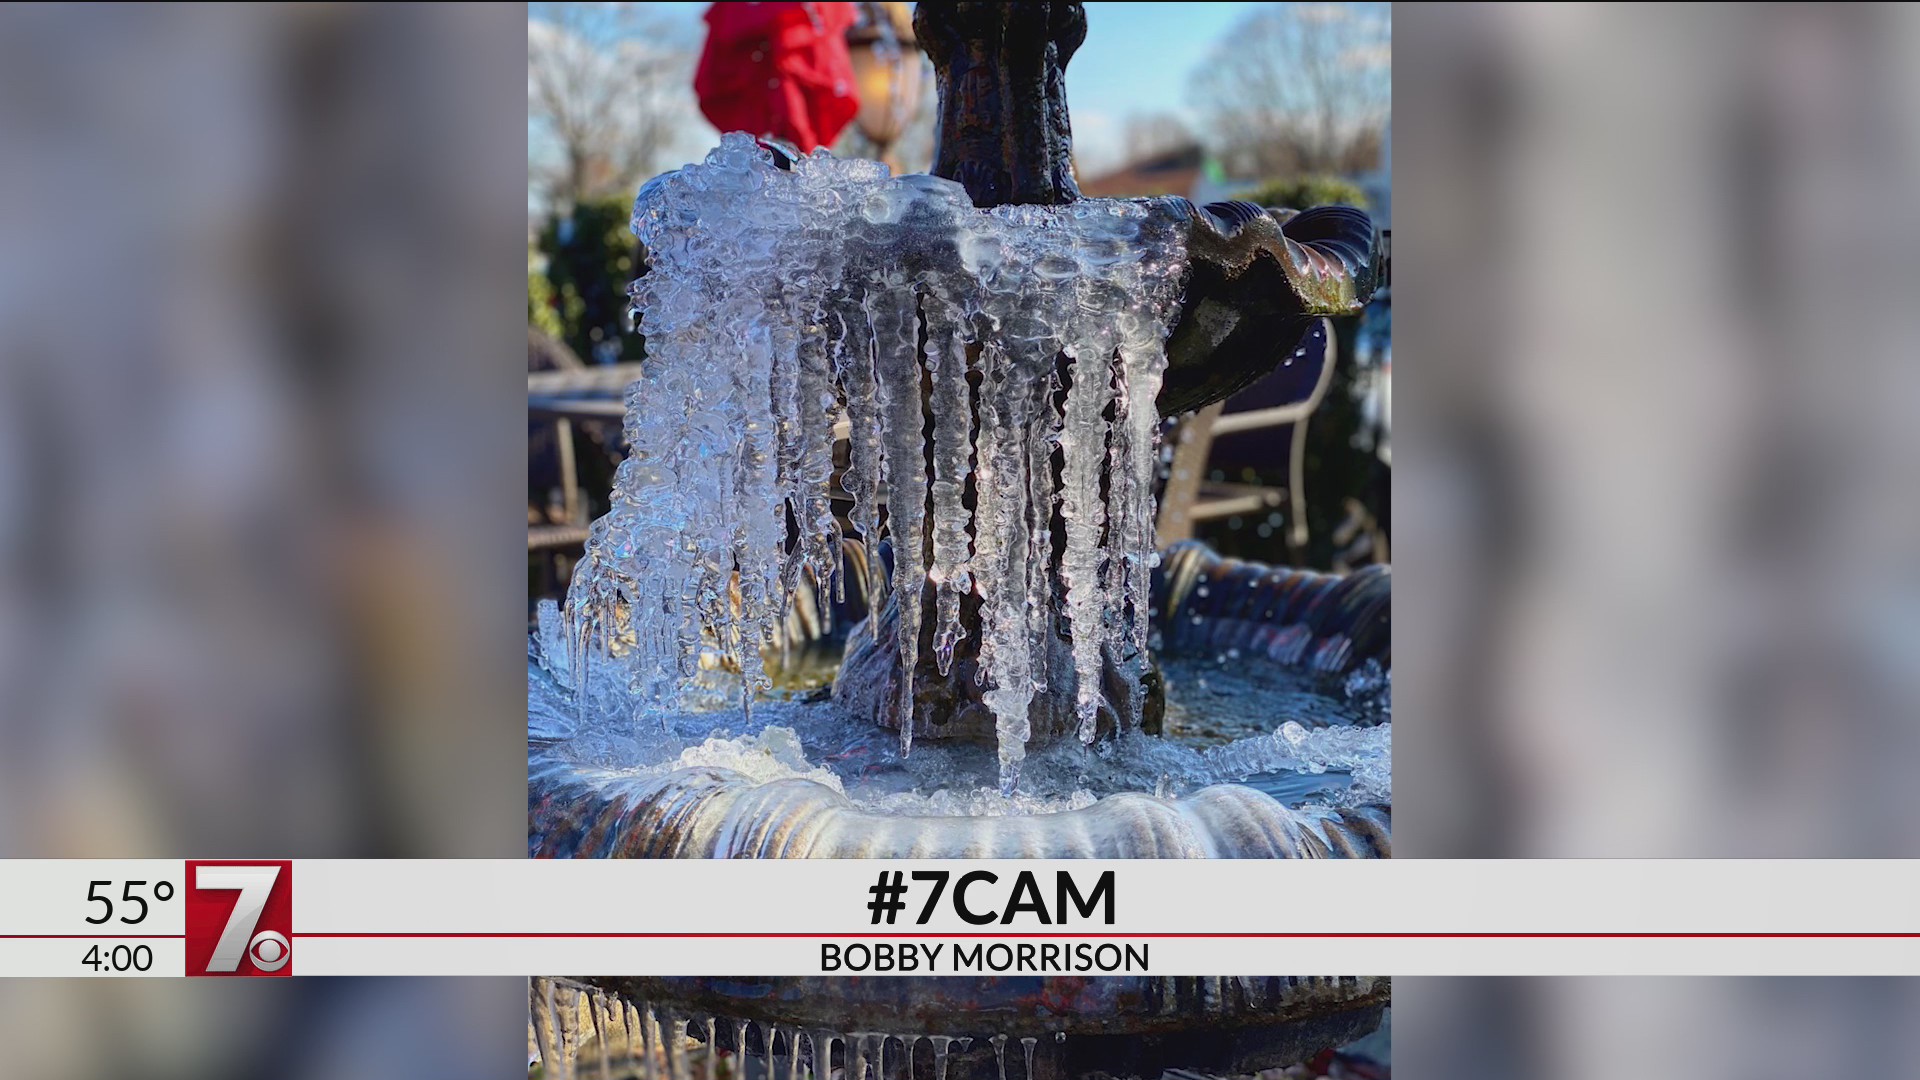 Thumbnail for the video titled "#7cam Frozen mornings lead to beautiful fountations"